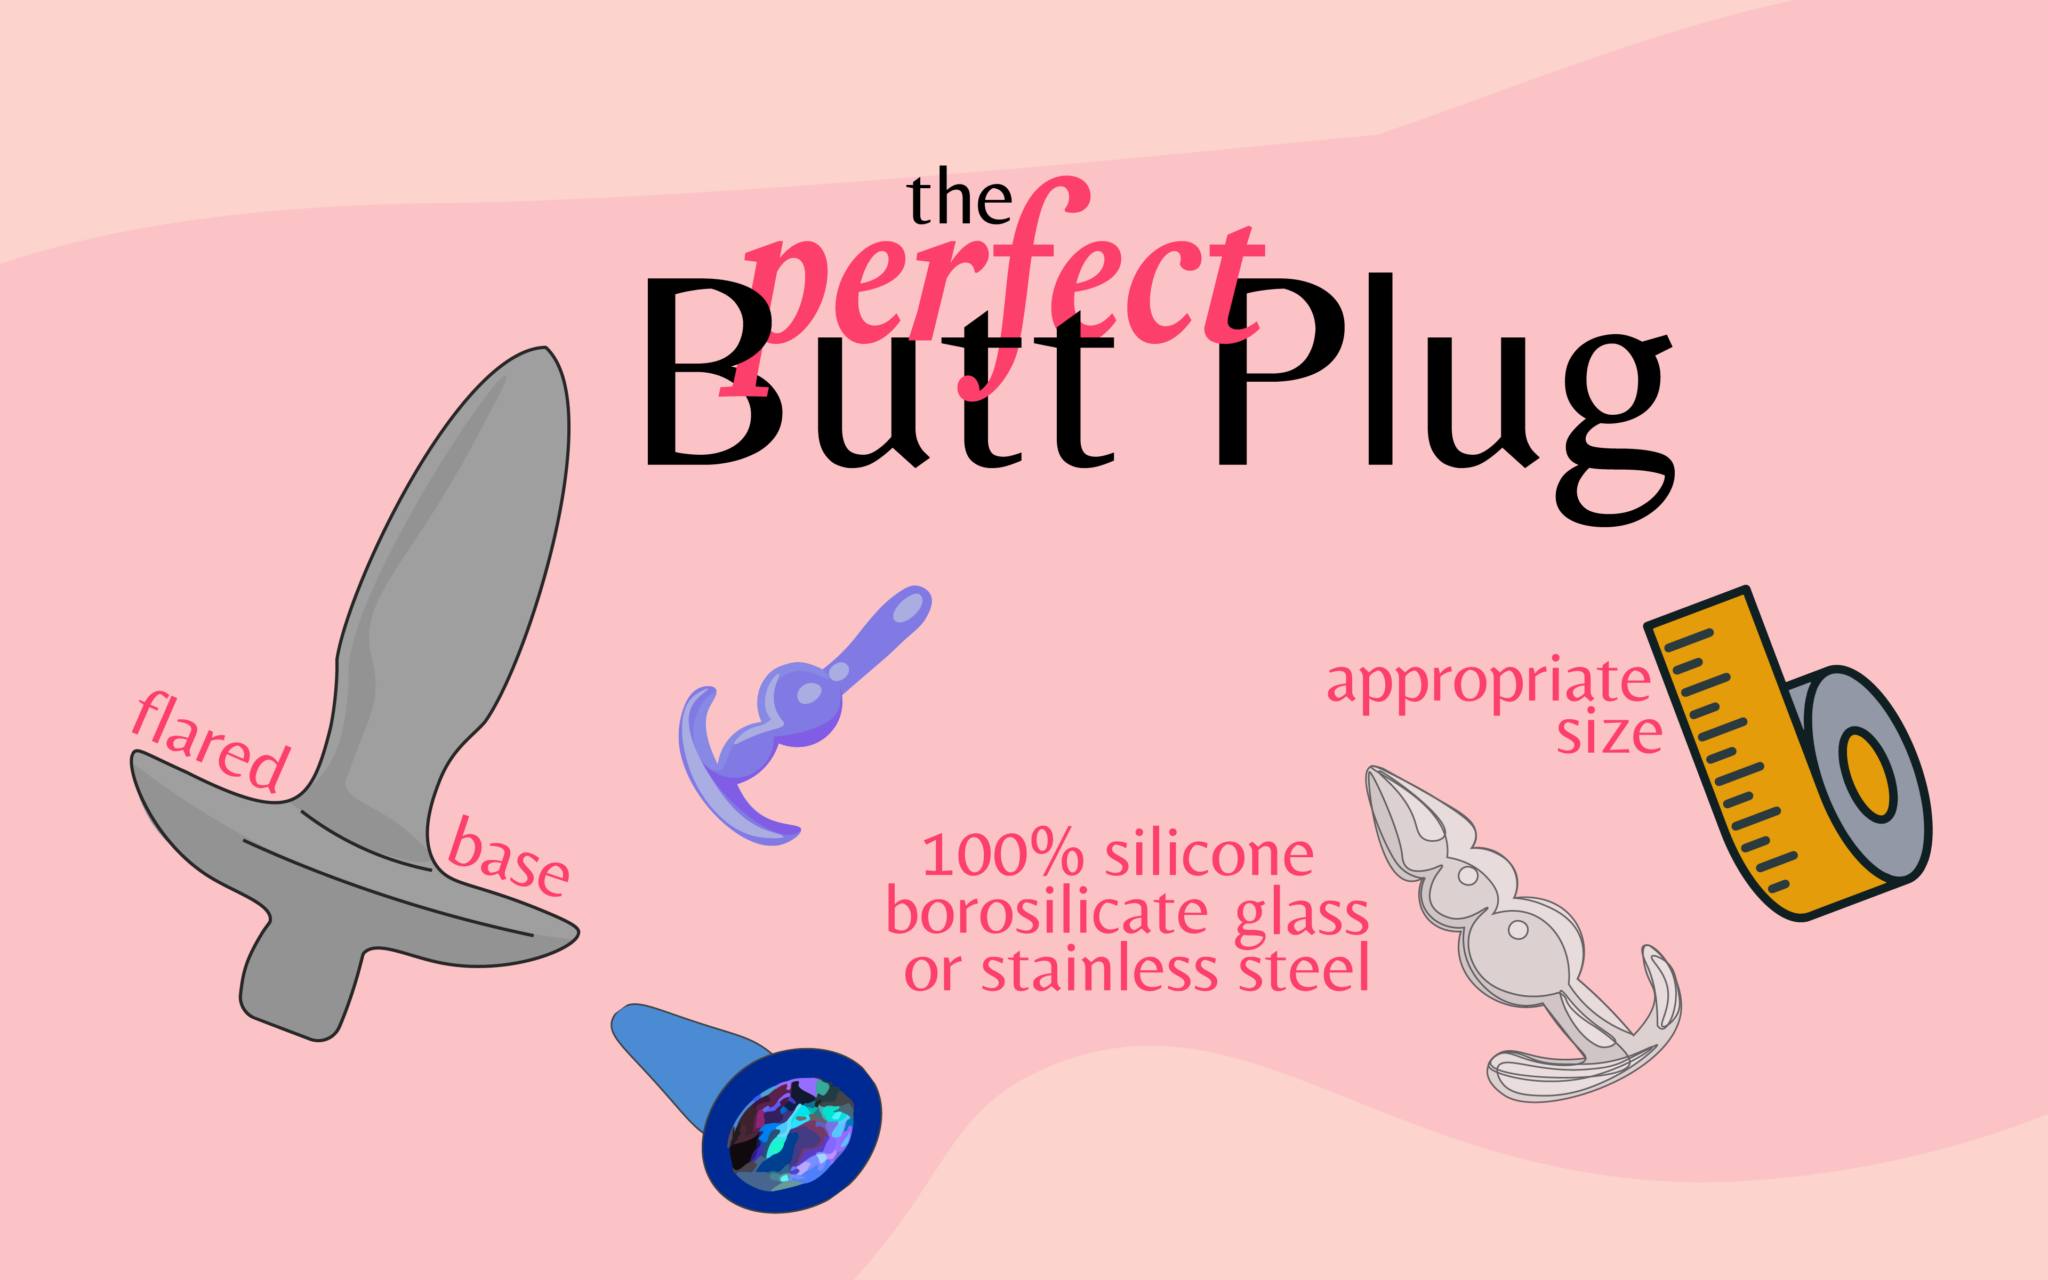 What to look for in a butt plug